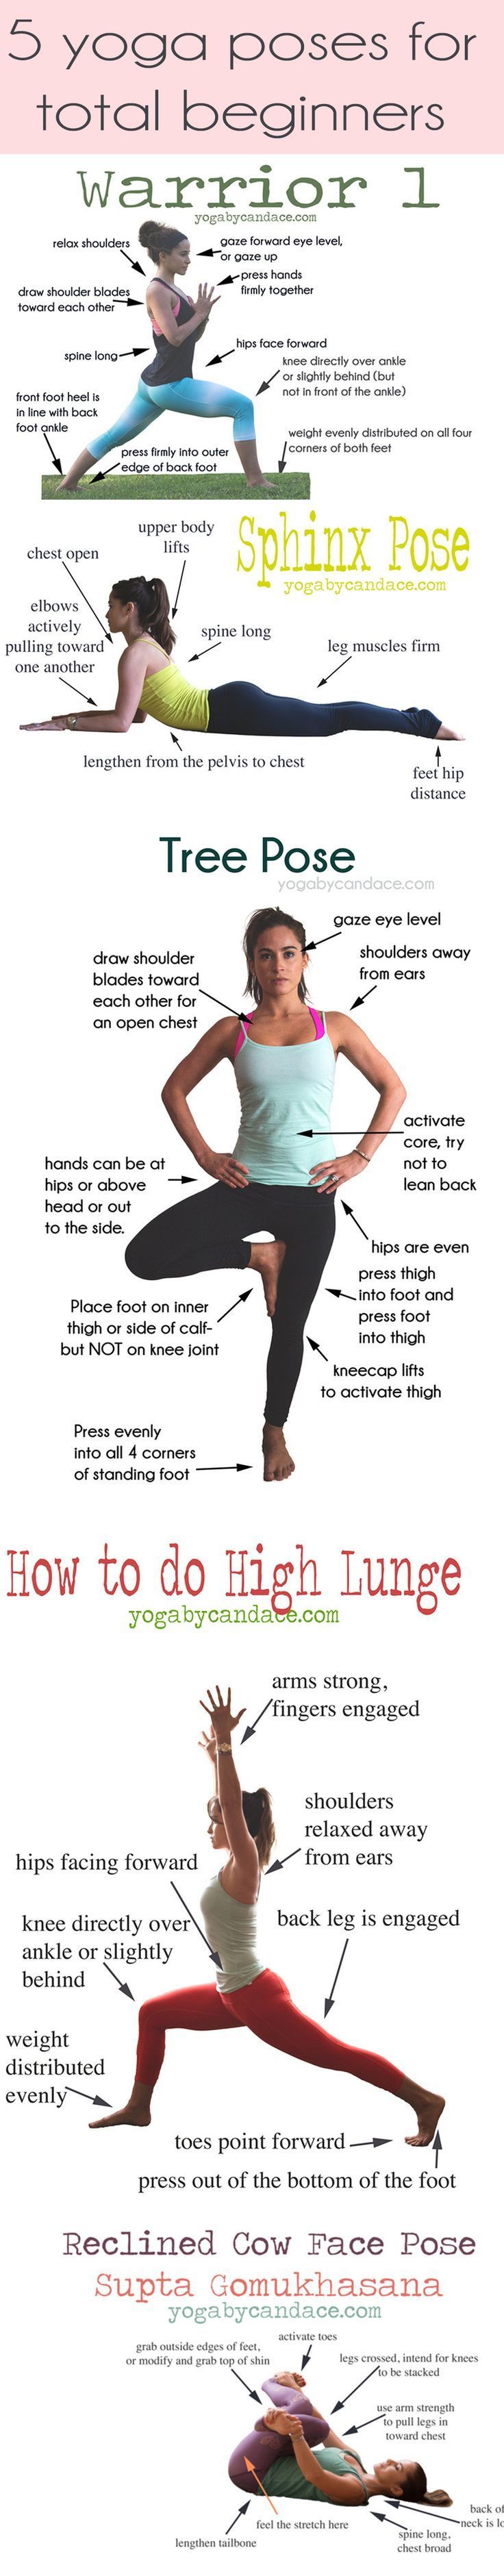 Pin now, practice later! 5 yoga poses for total beginners. Come chat on the foru...